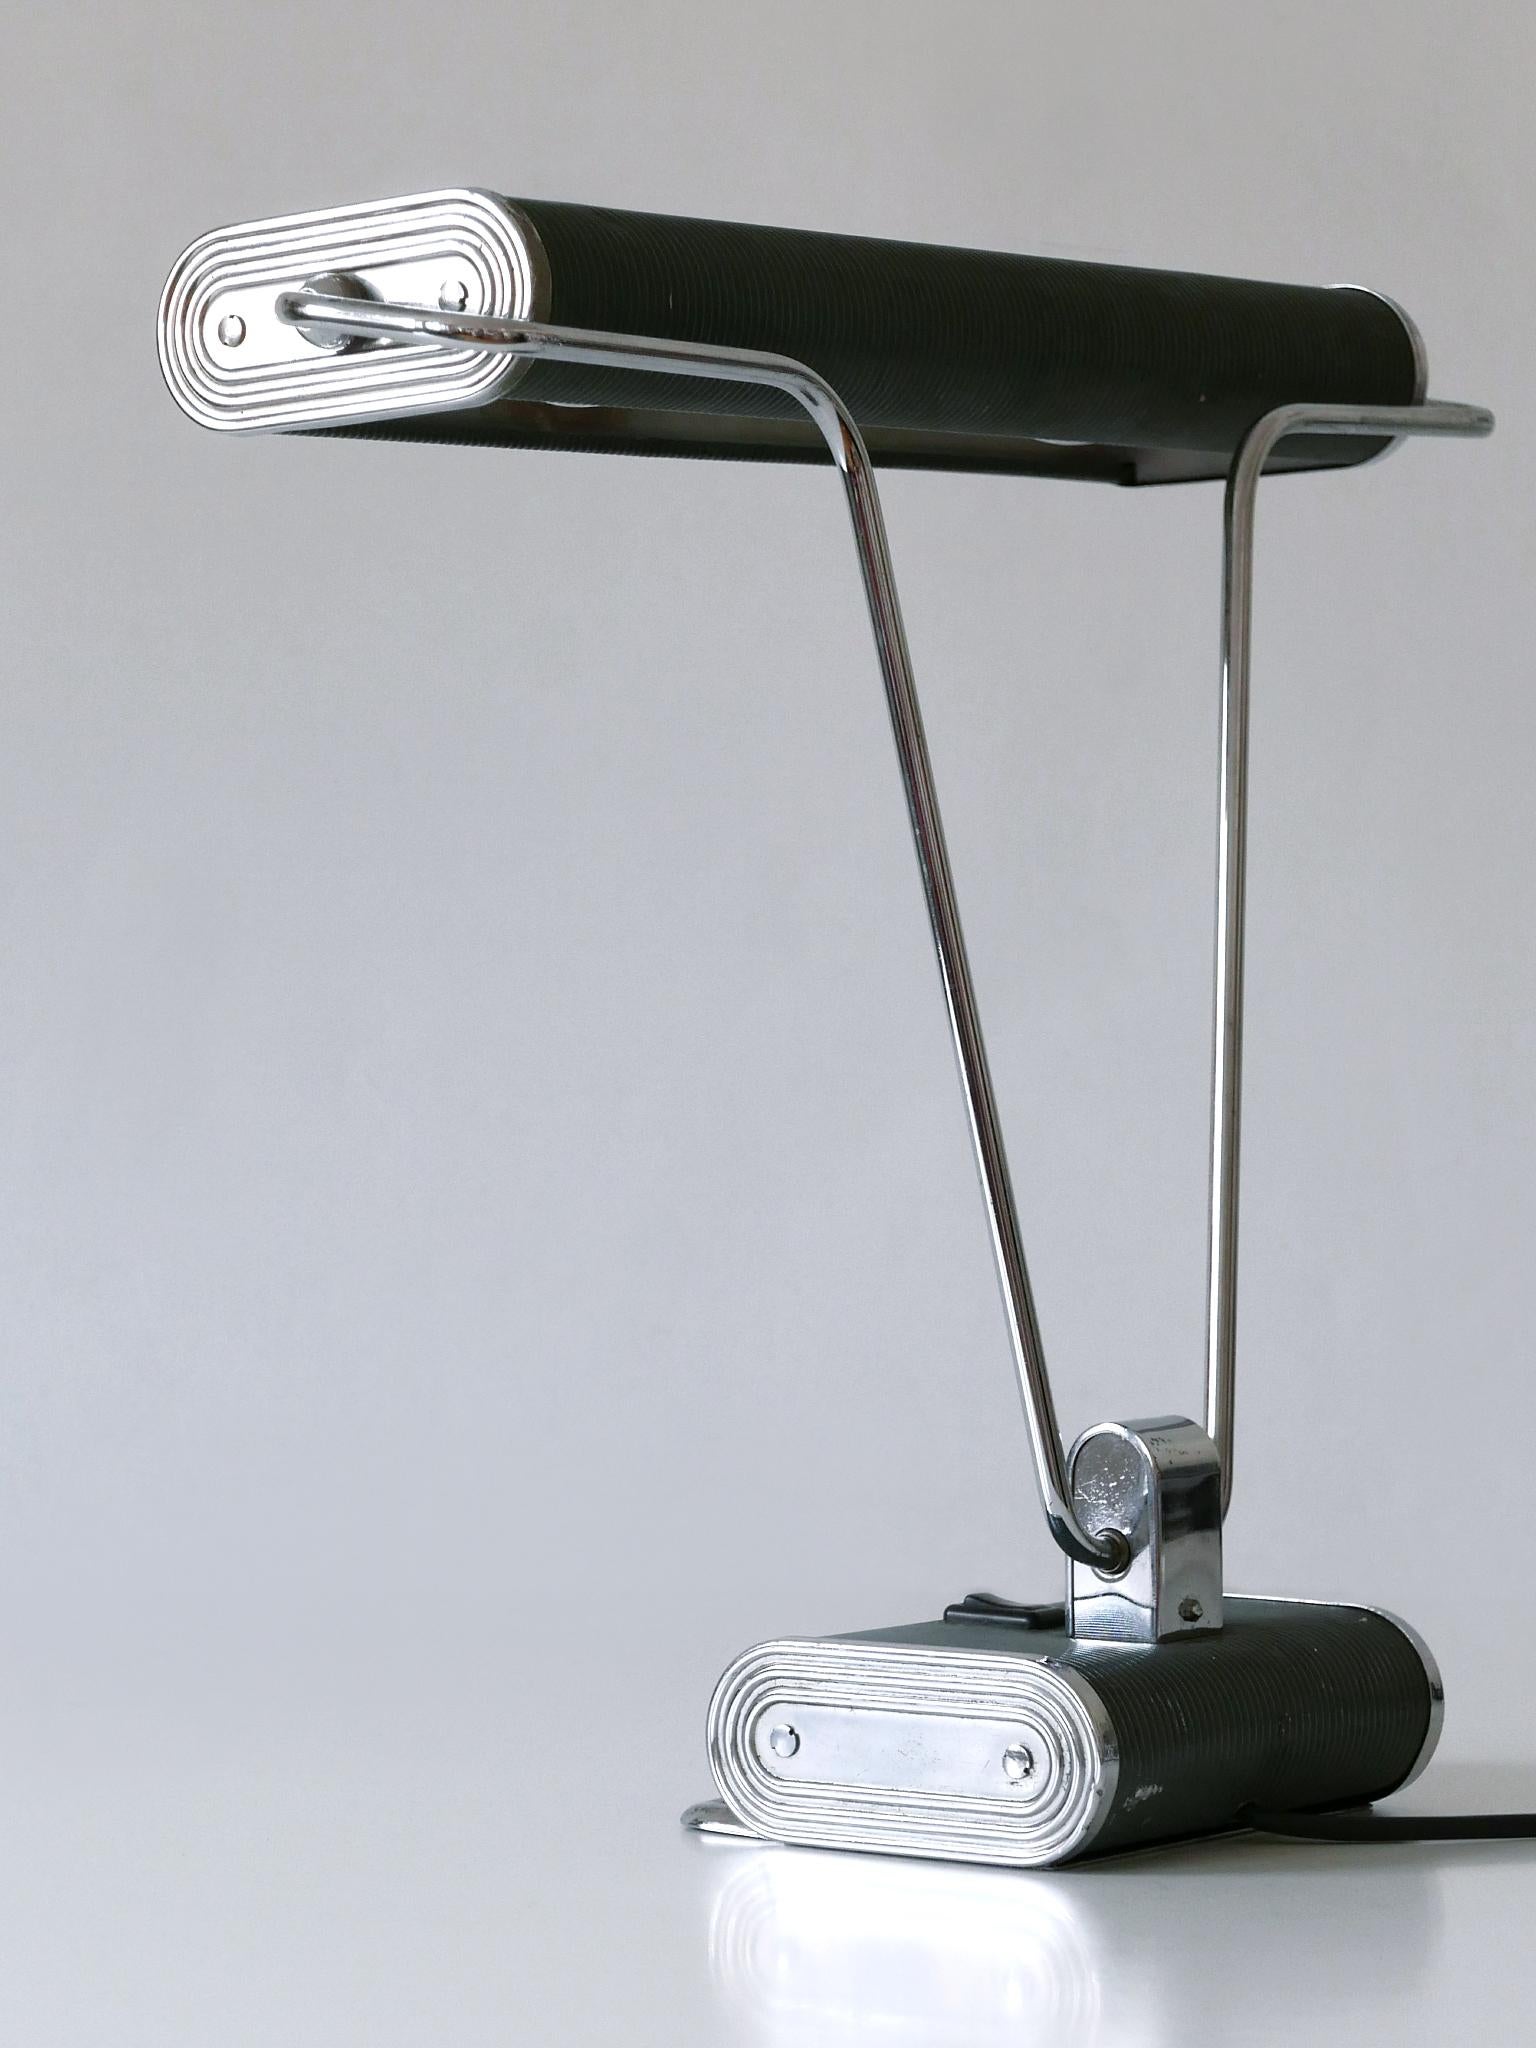 Art Deco Table Lamp or Desk Light 'No 71' by André Mounique for Jumo 1930s In Good Condition For Sale In Munich, DE